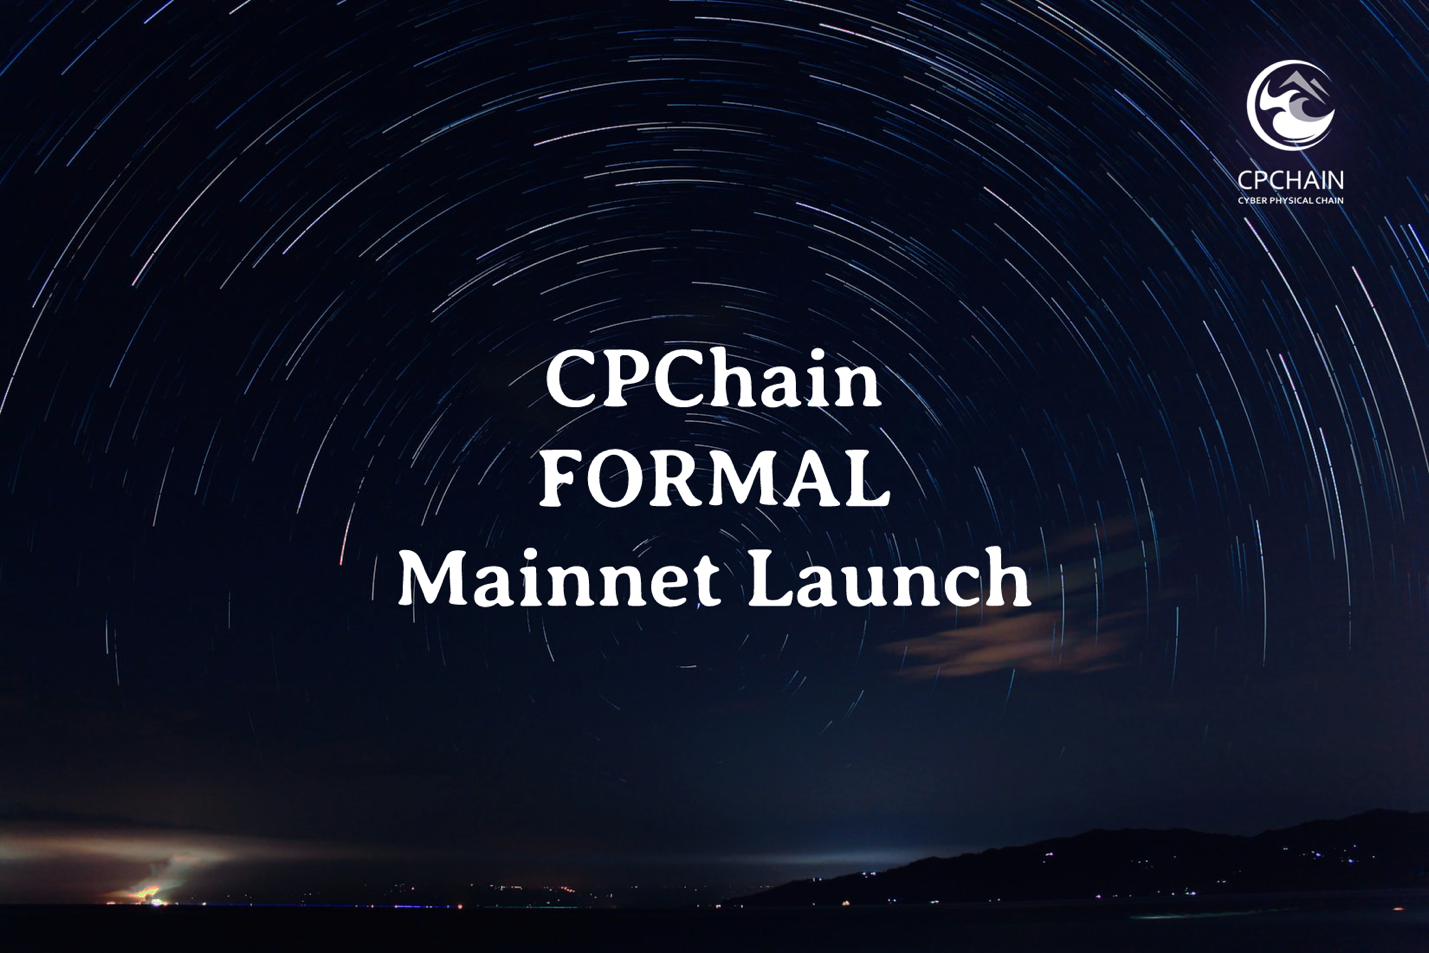 CPChain Mainnet Launched to Bring Fast IoT Solutions